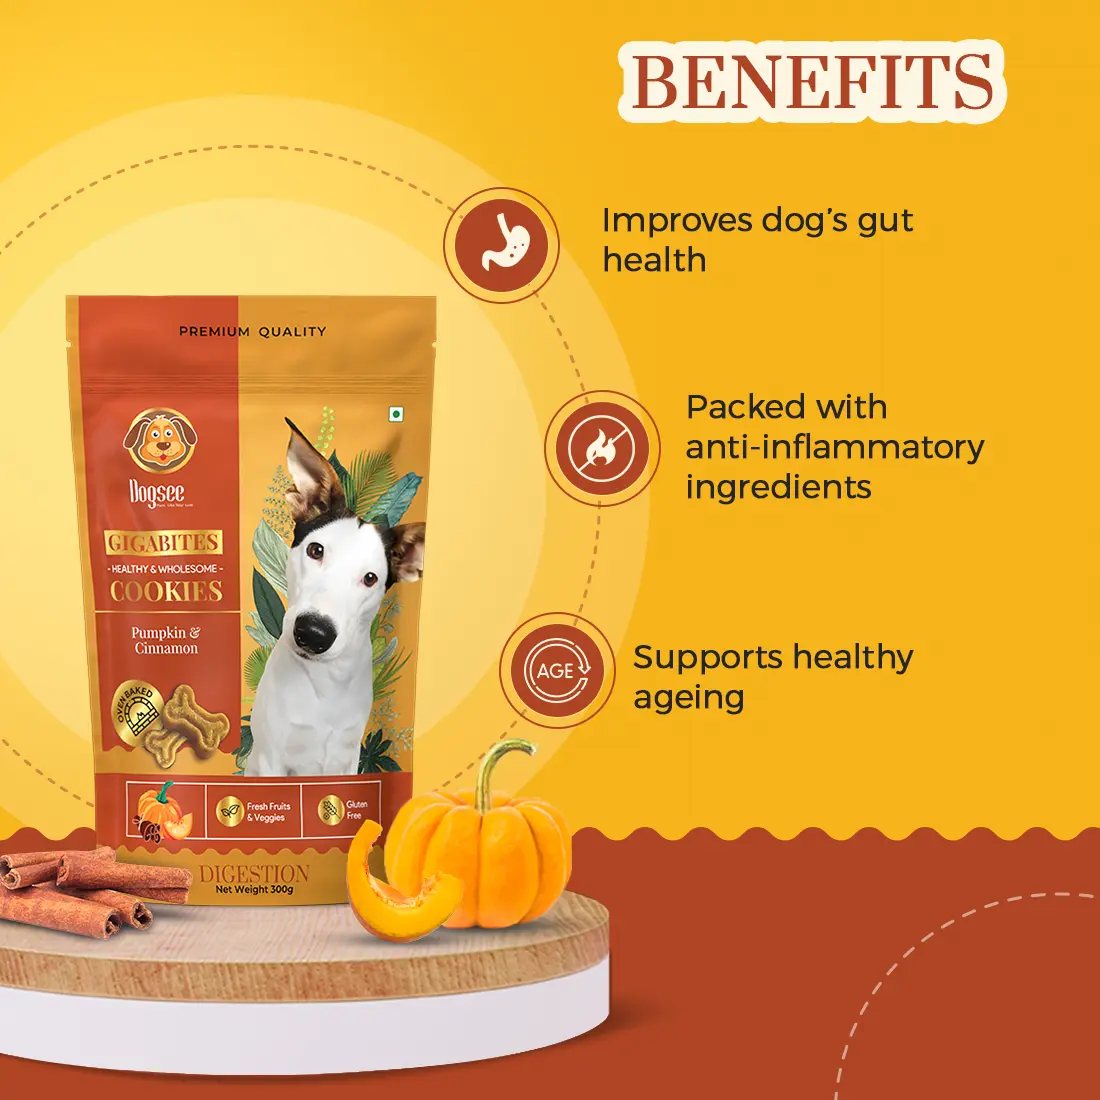 Benefits - Pumpkin and Cinnamon Cookies for Dogs